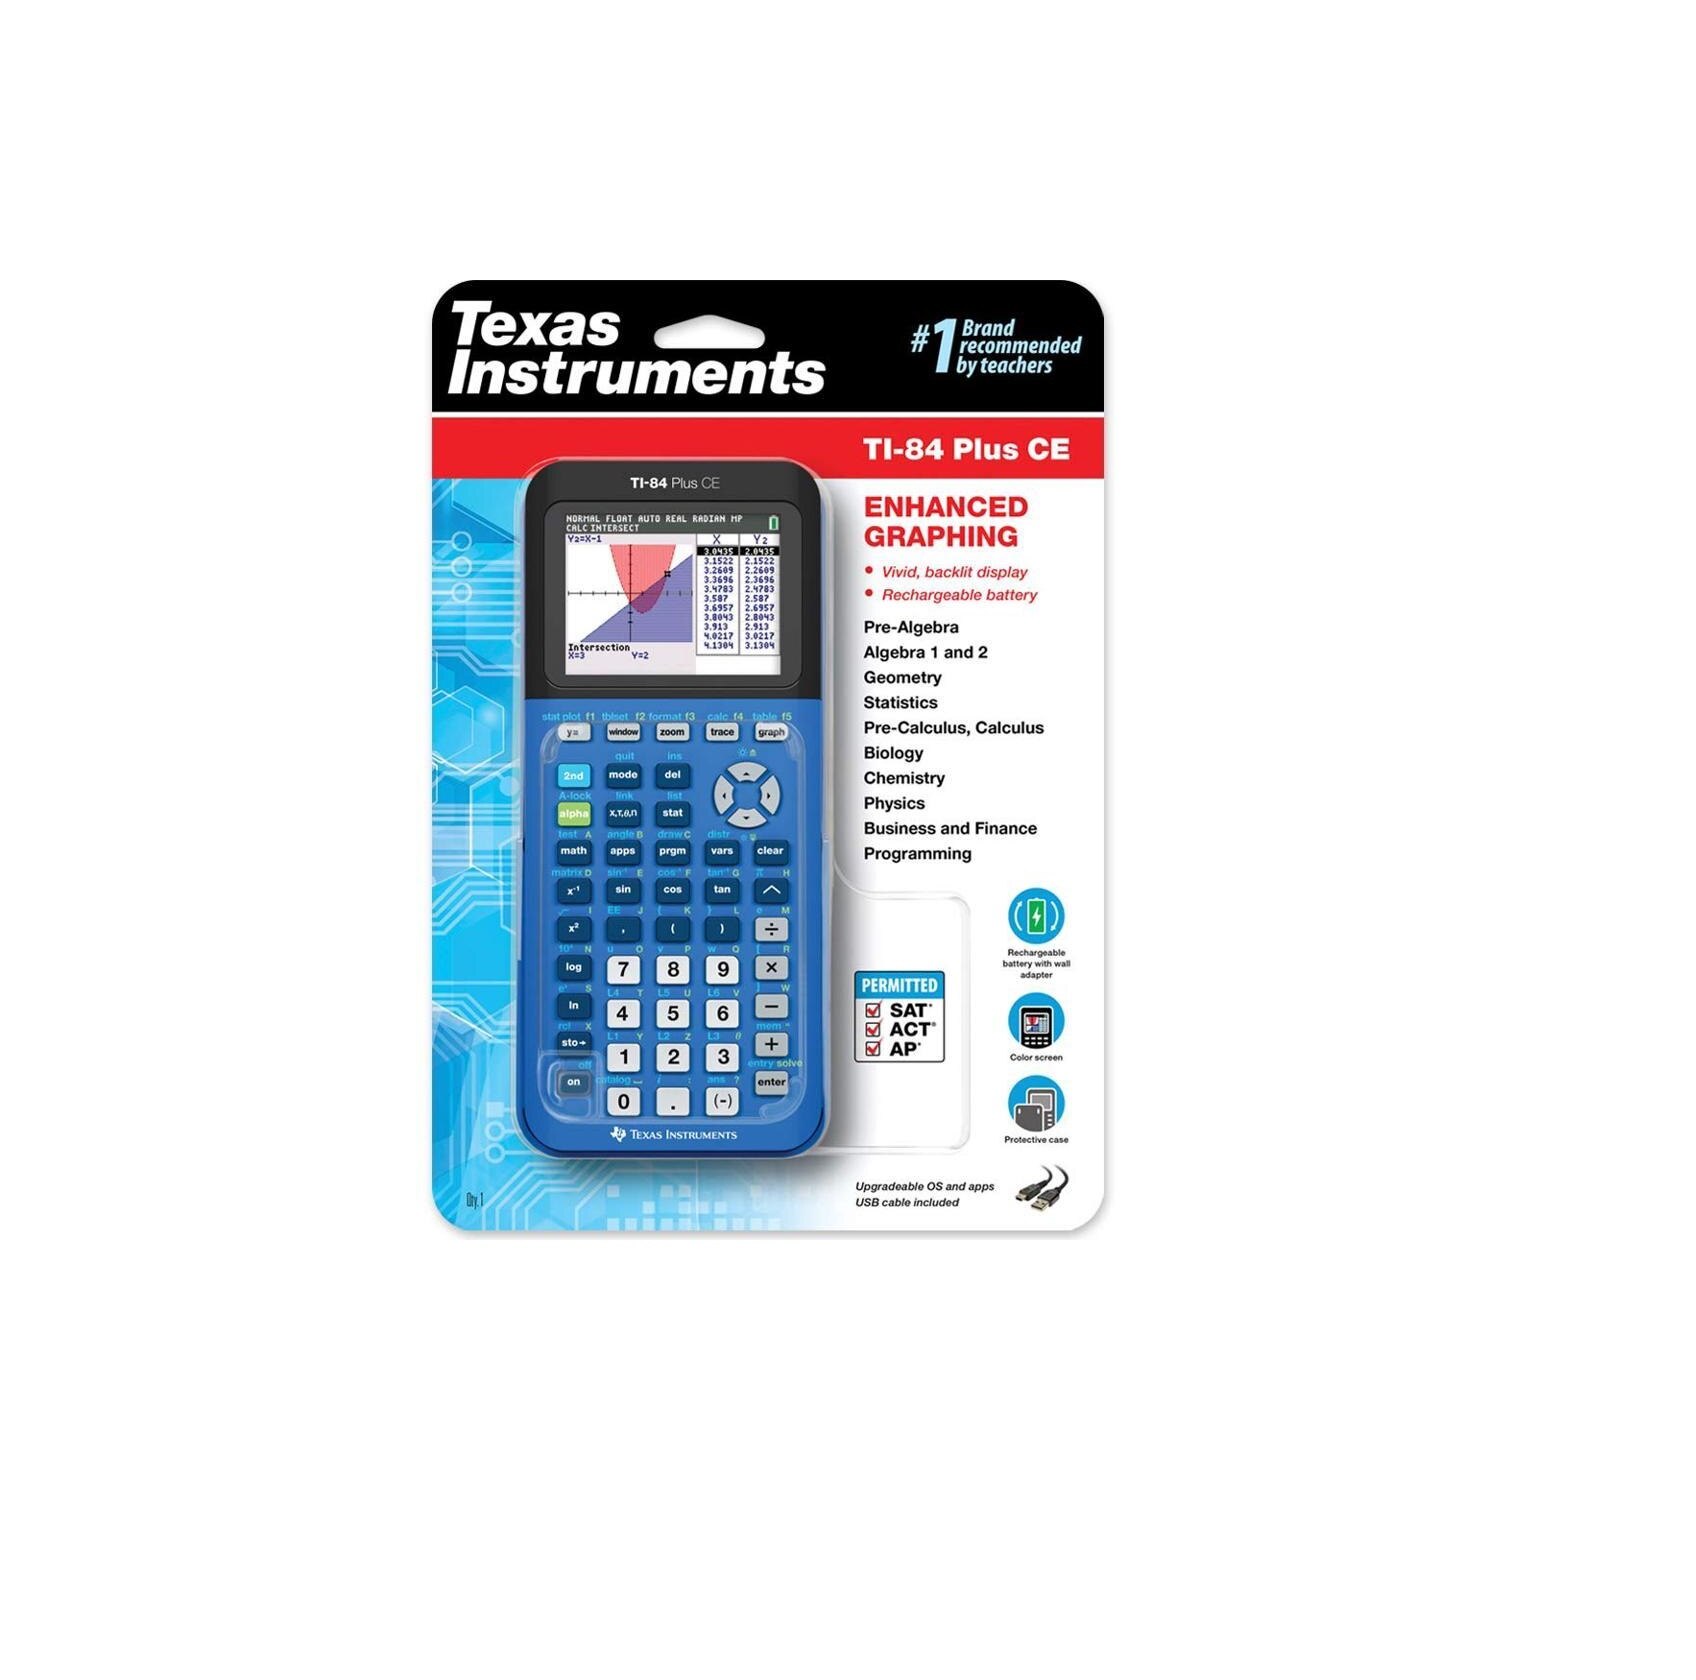 Texas Instruments TI-84 Plus CE Graphing Calculator. Features full-color backlit display, high resolution screen now with a new sleek, slim look, TI Rechargeable Battery, Familiar 84 Plus Family functionality.